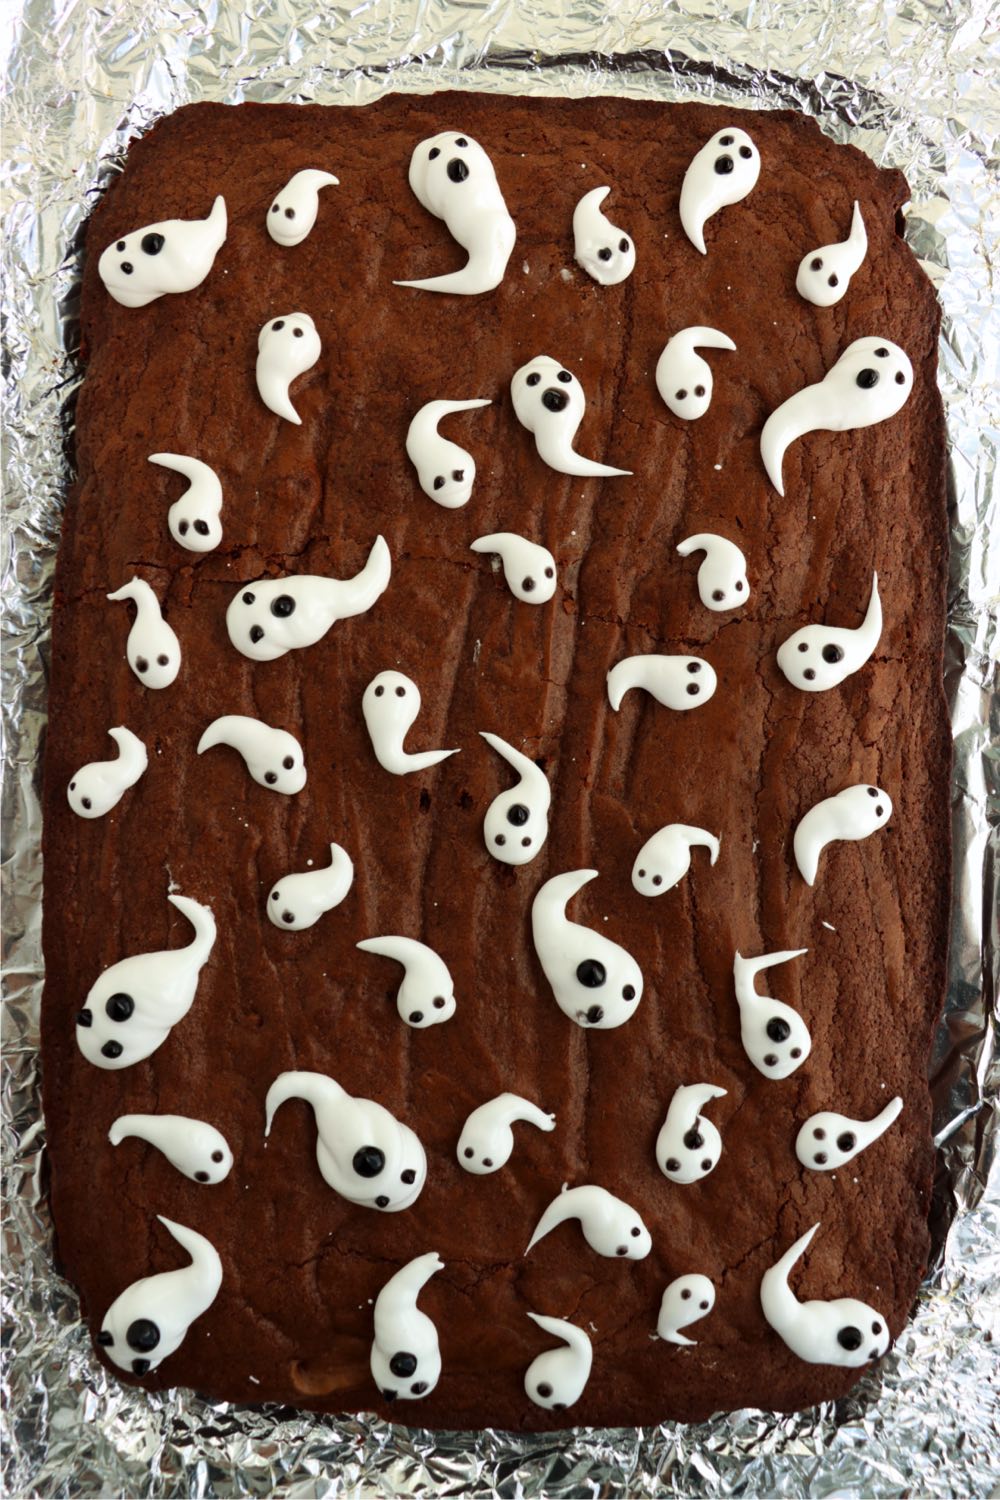 pan of brownies topped with marshmallow ghosts